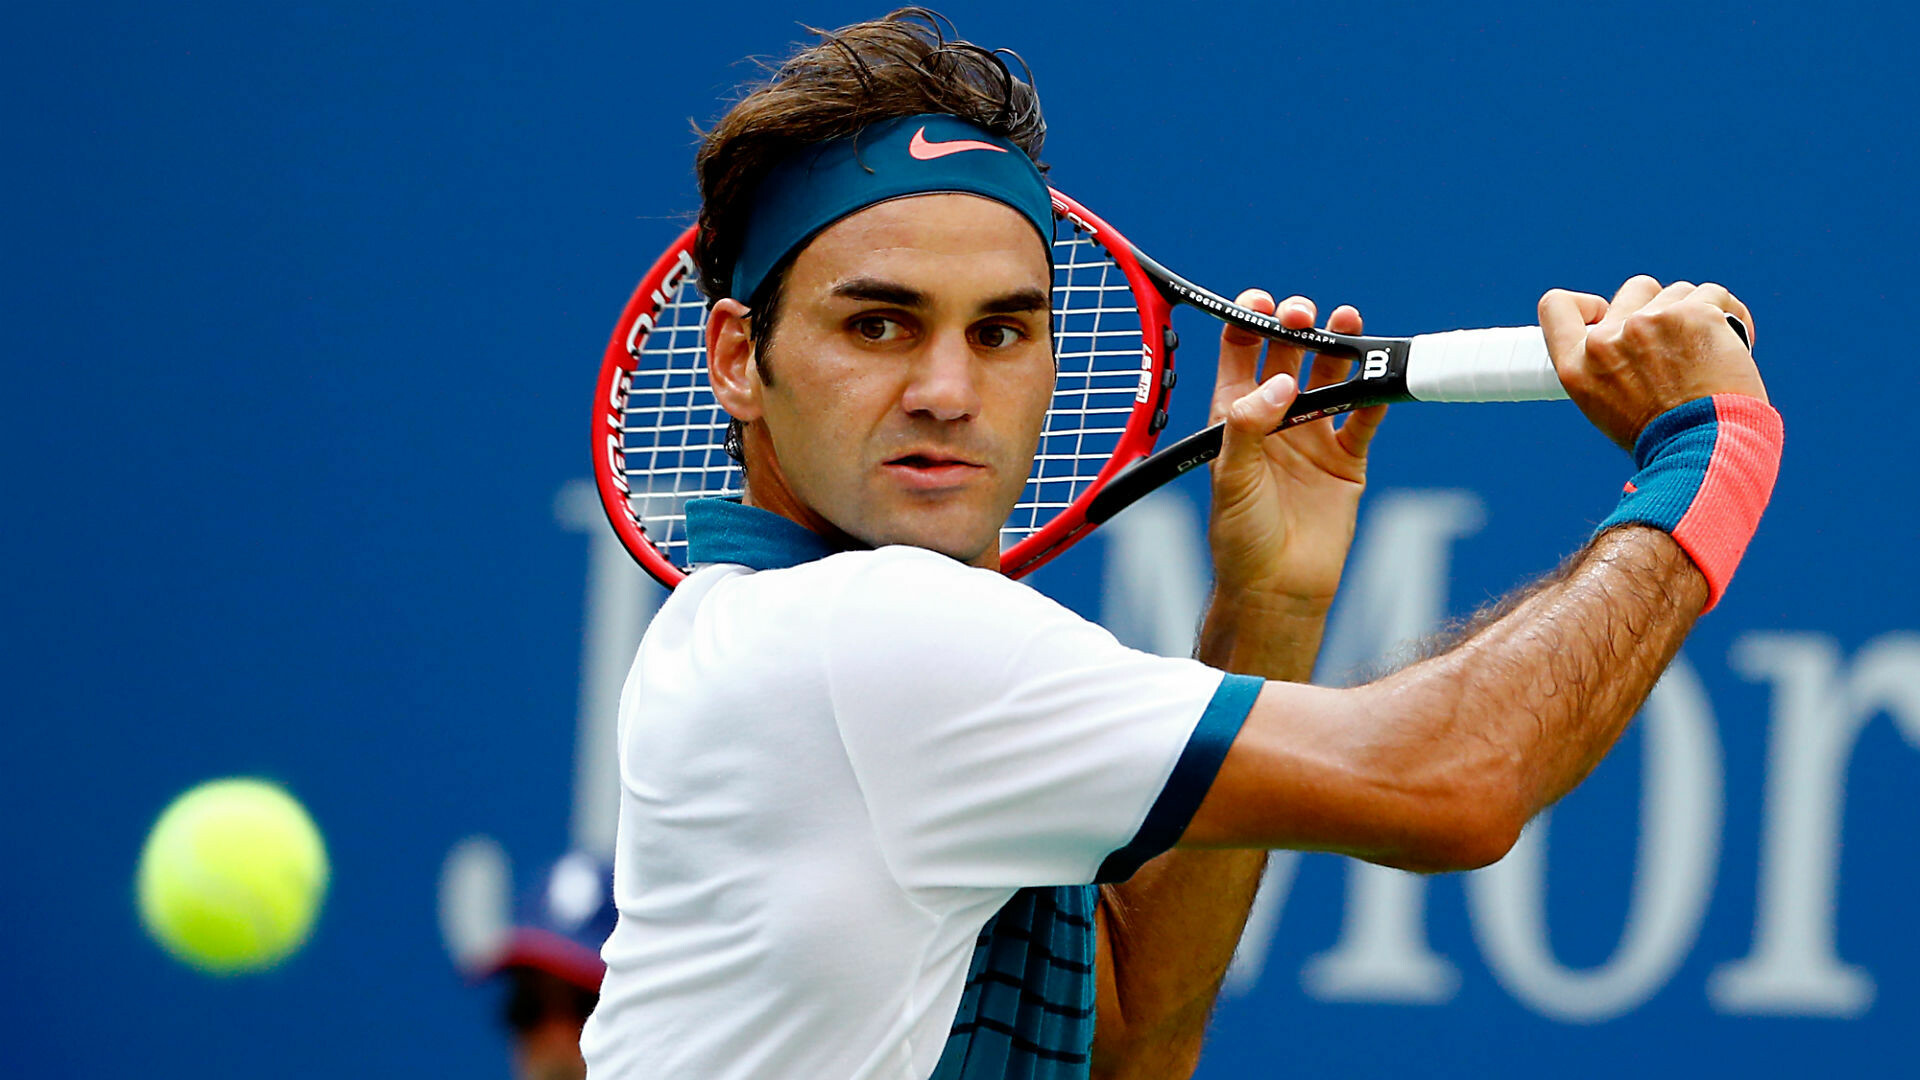 Roger Federer: He won the US Open for a fifth consecutive time in 2008. 1920x1080 Full HD Wallpaper.